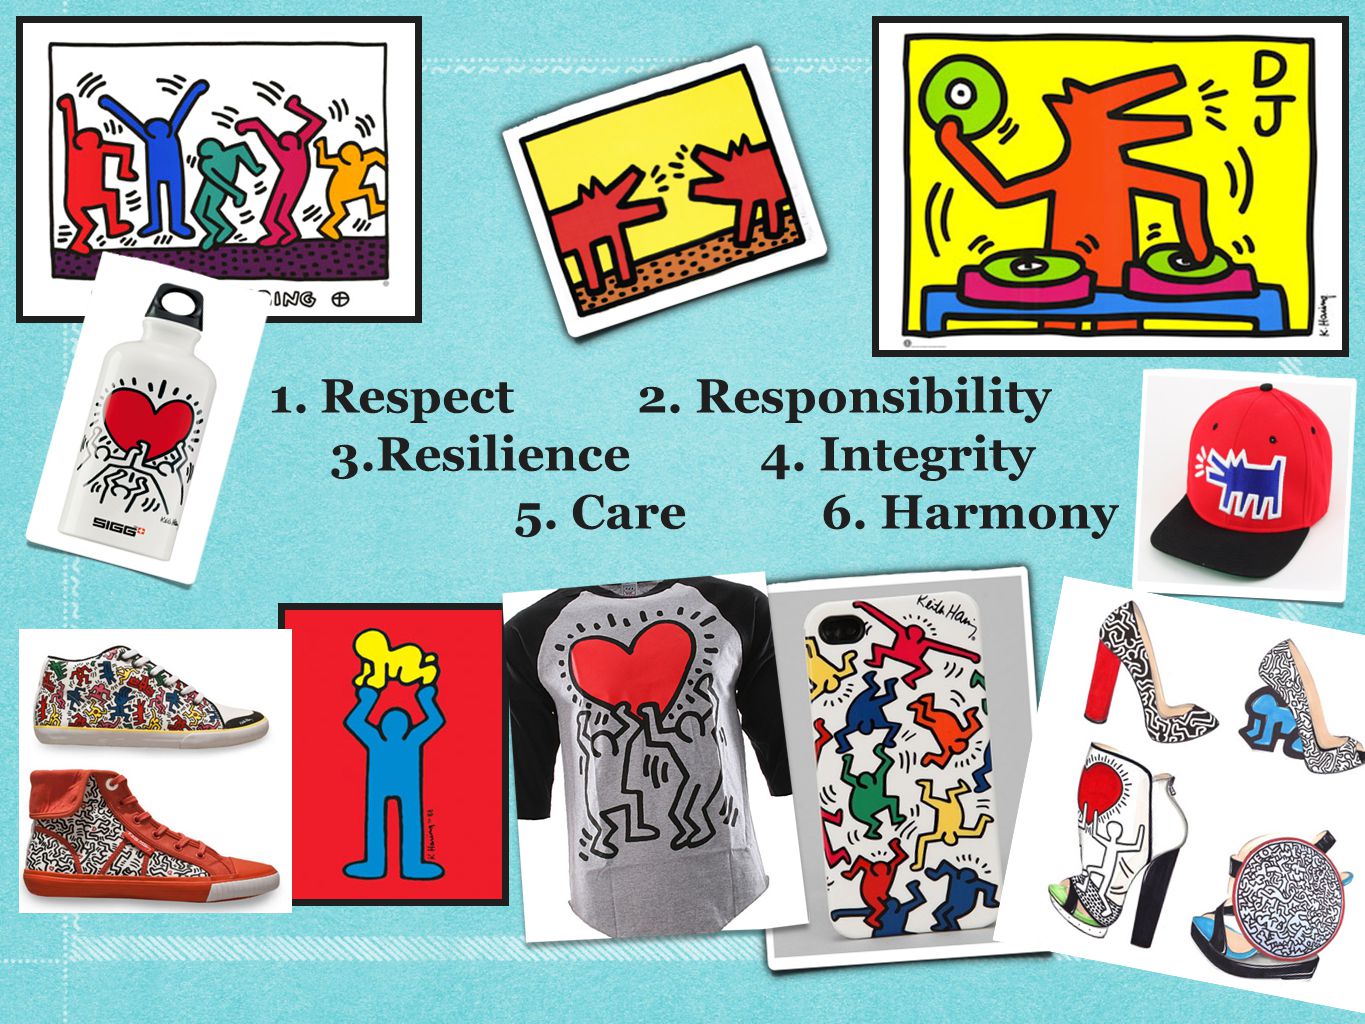 1. Respect 2. Responsibility 3.Resilience 4. Integrity 5. Care 6. Harmony